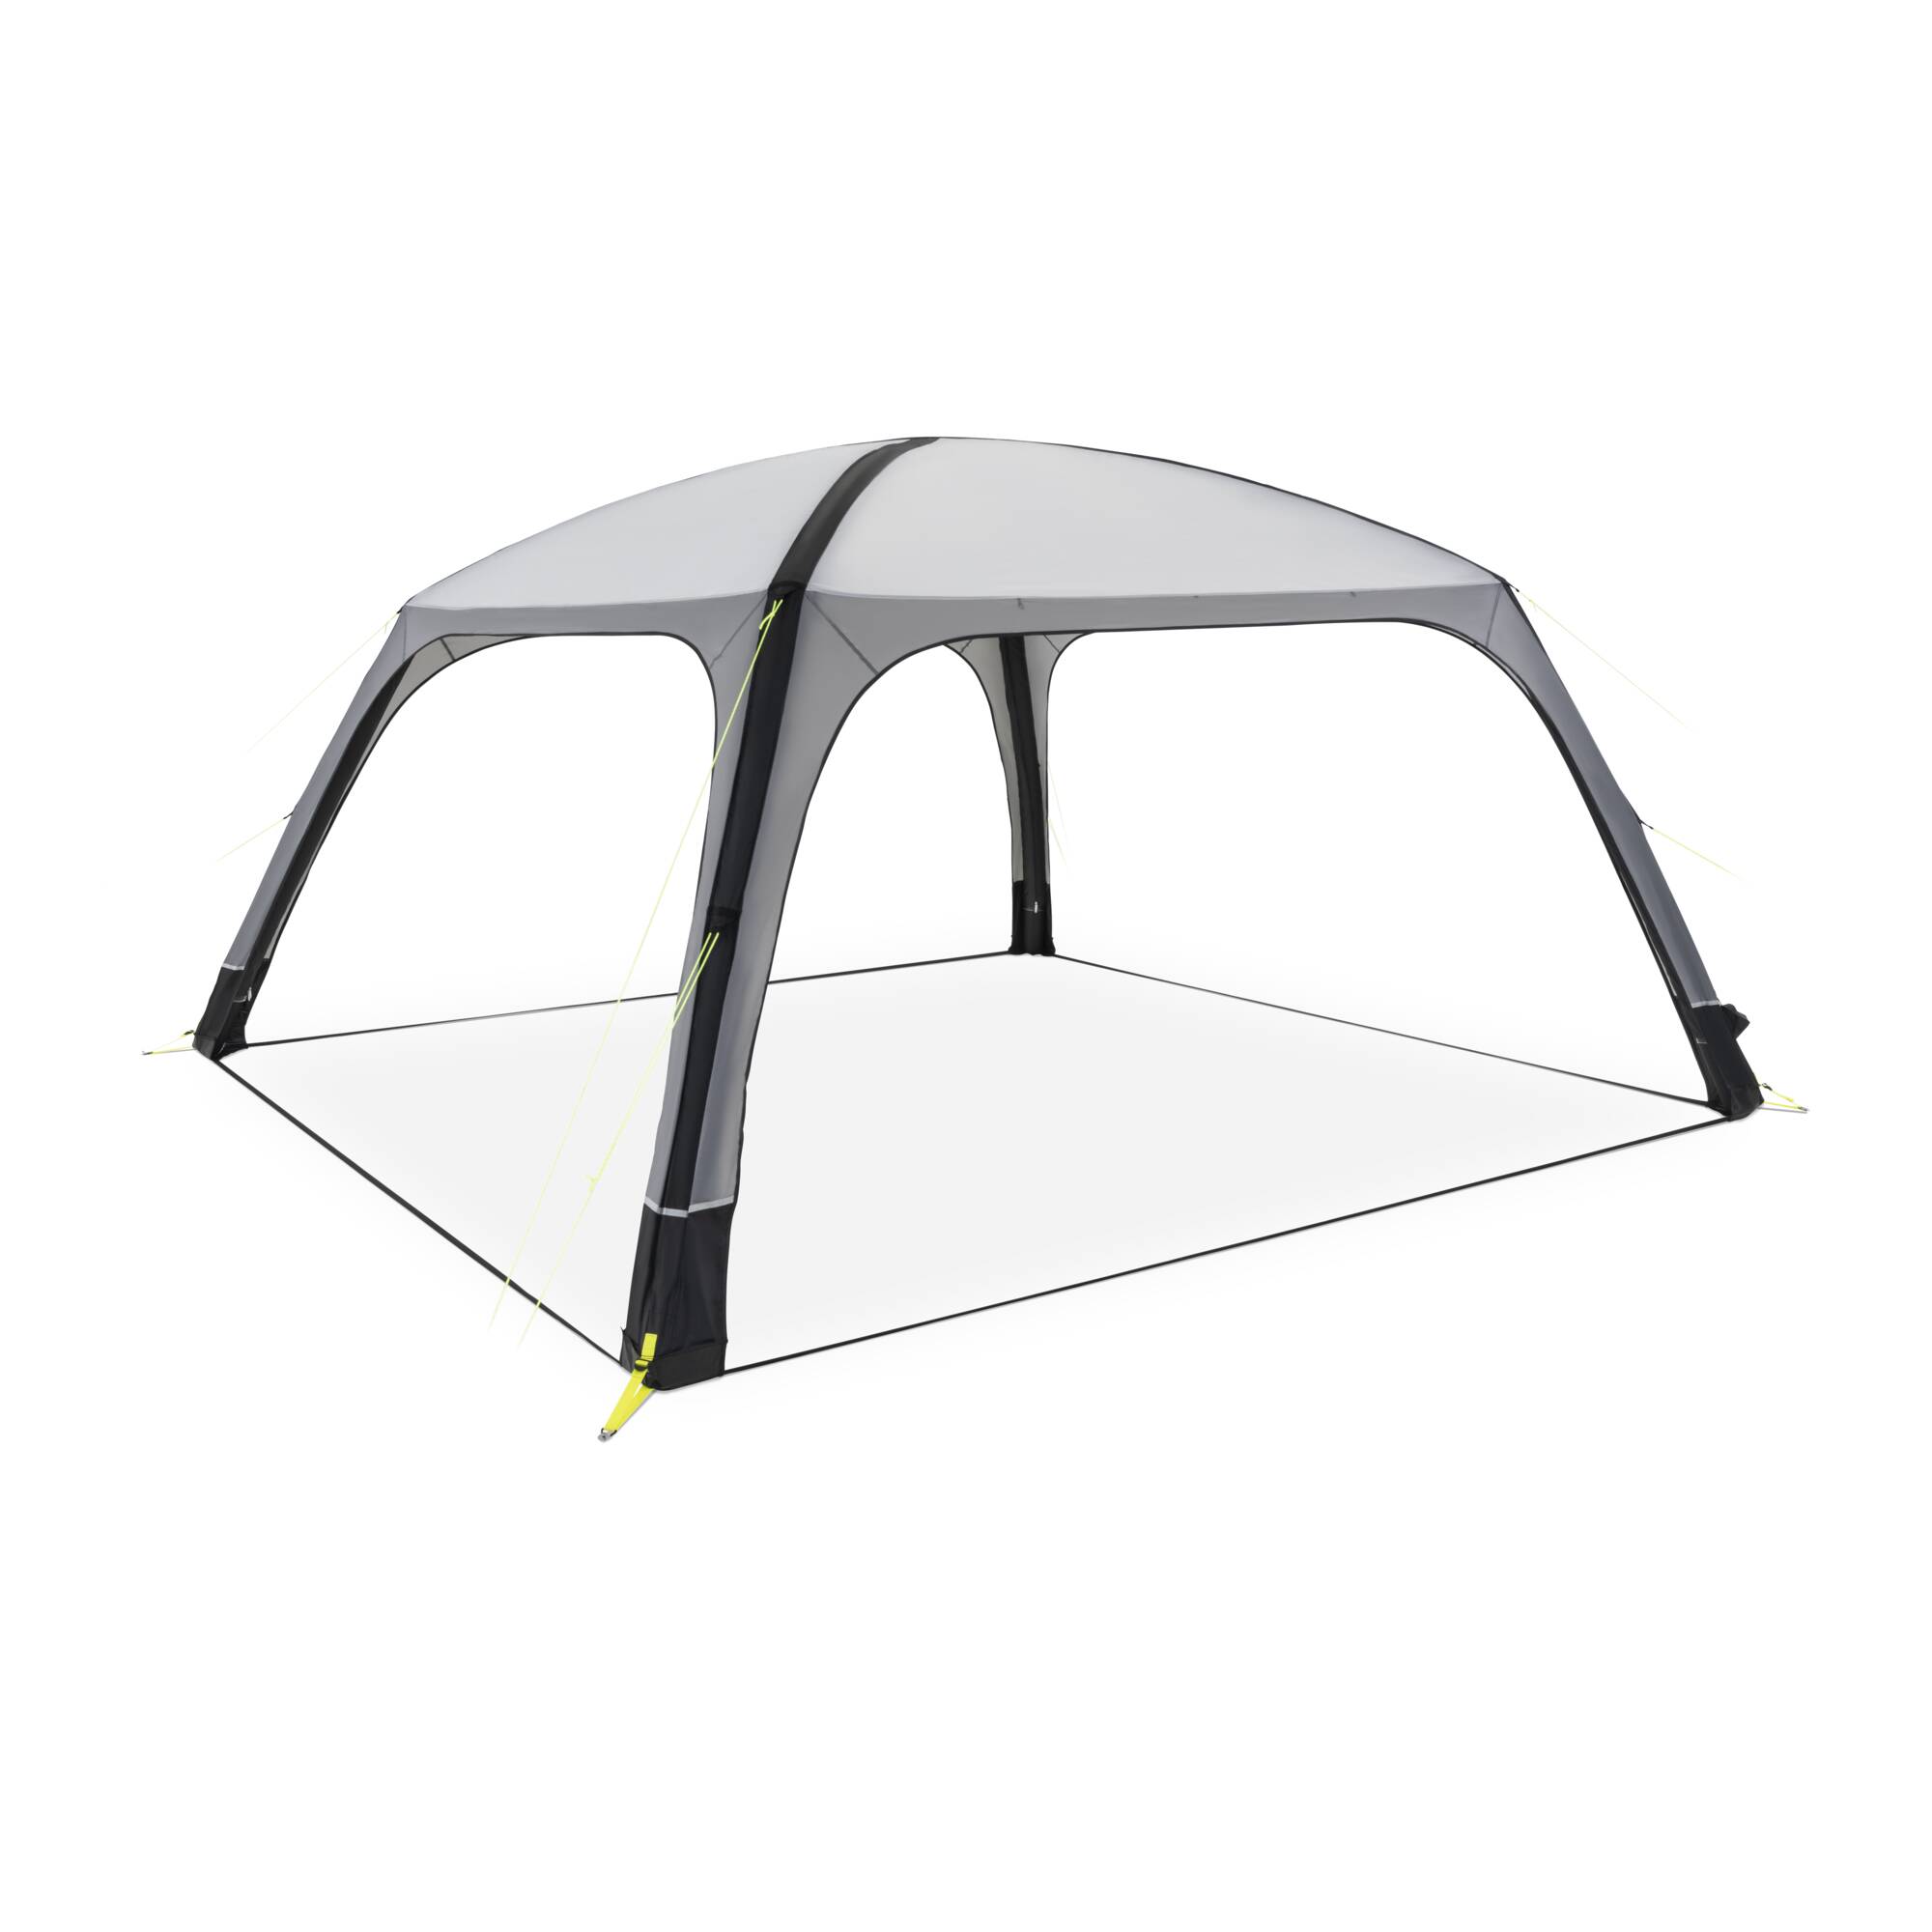 Dometic Air Shelter 400 Tent Spare Parts